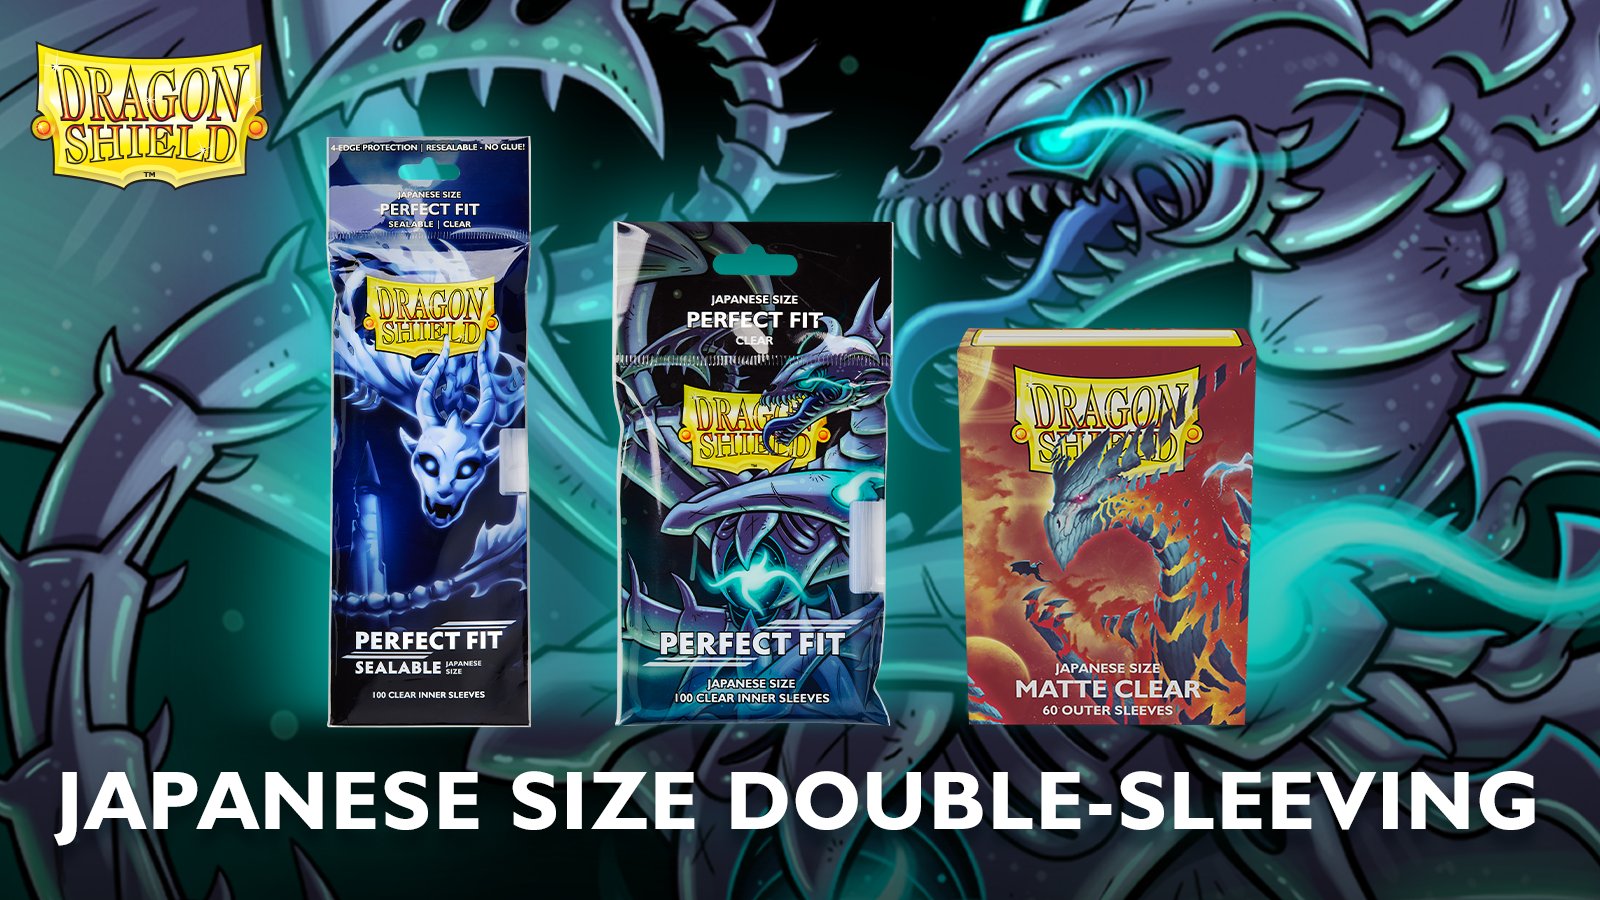 Dragon Shield on X: Double-sleeving is coming to Japanese size